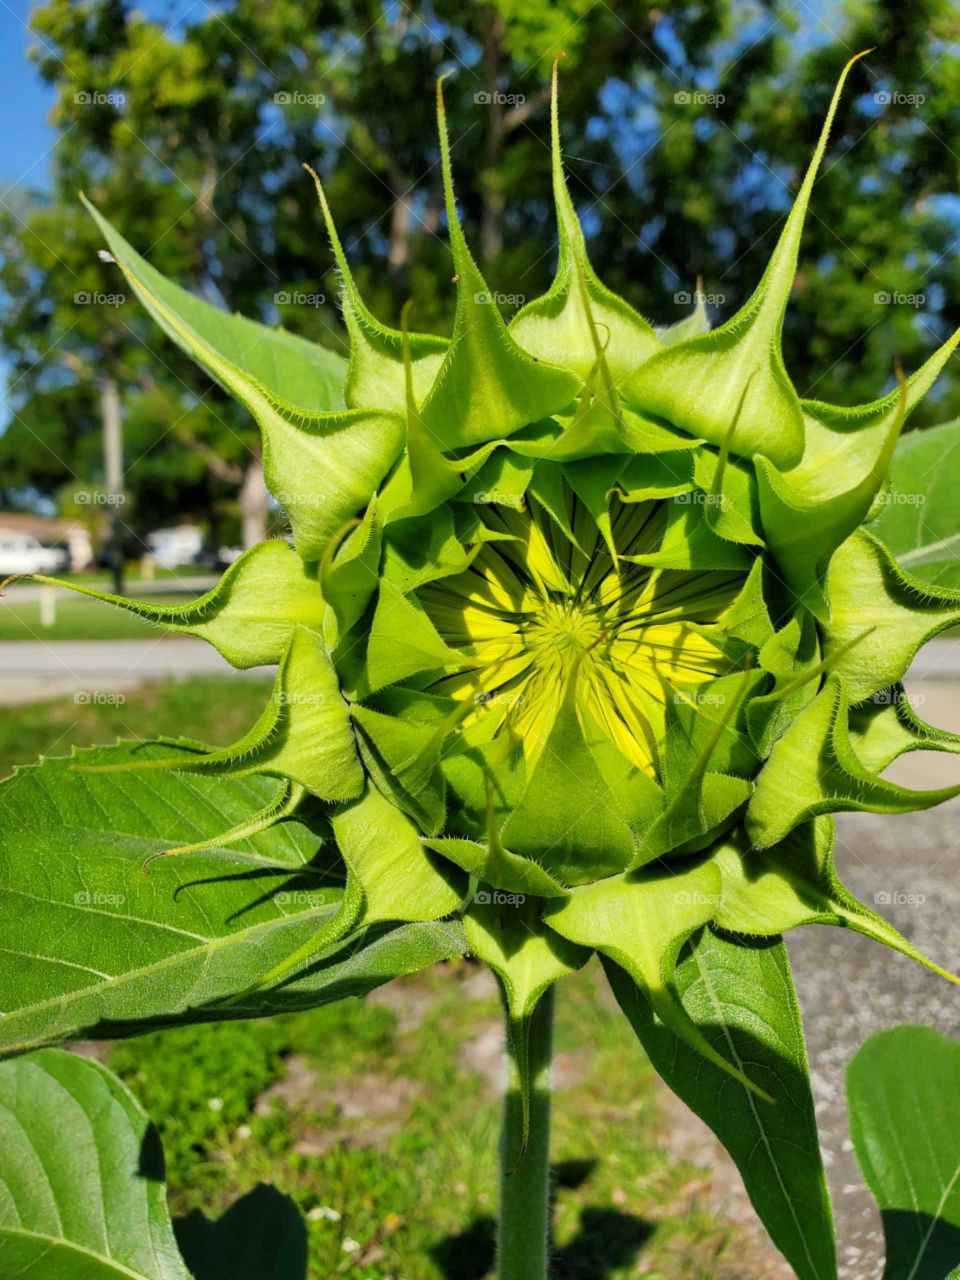 Sunflower getting ready to open 